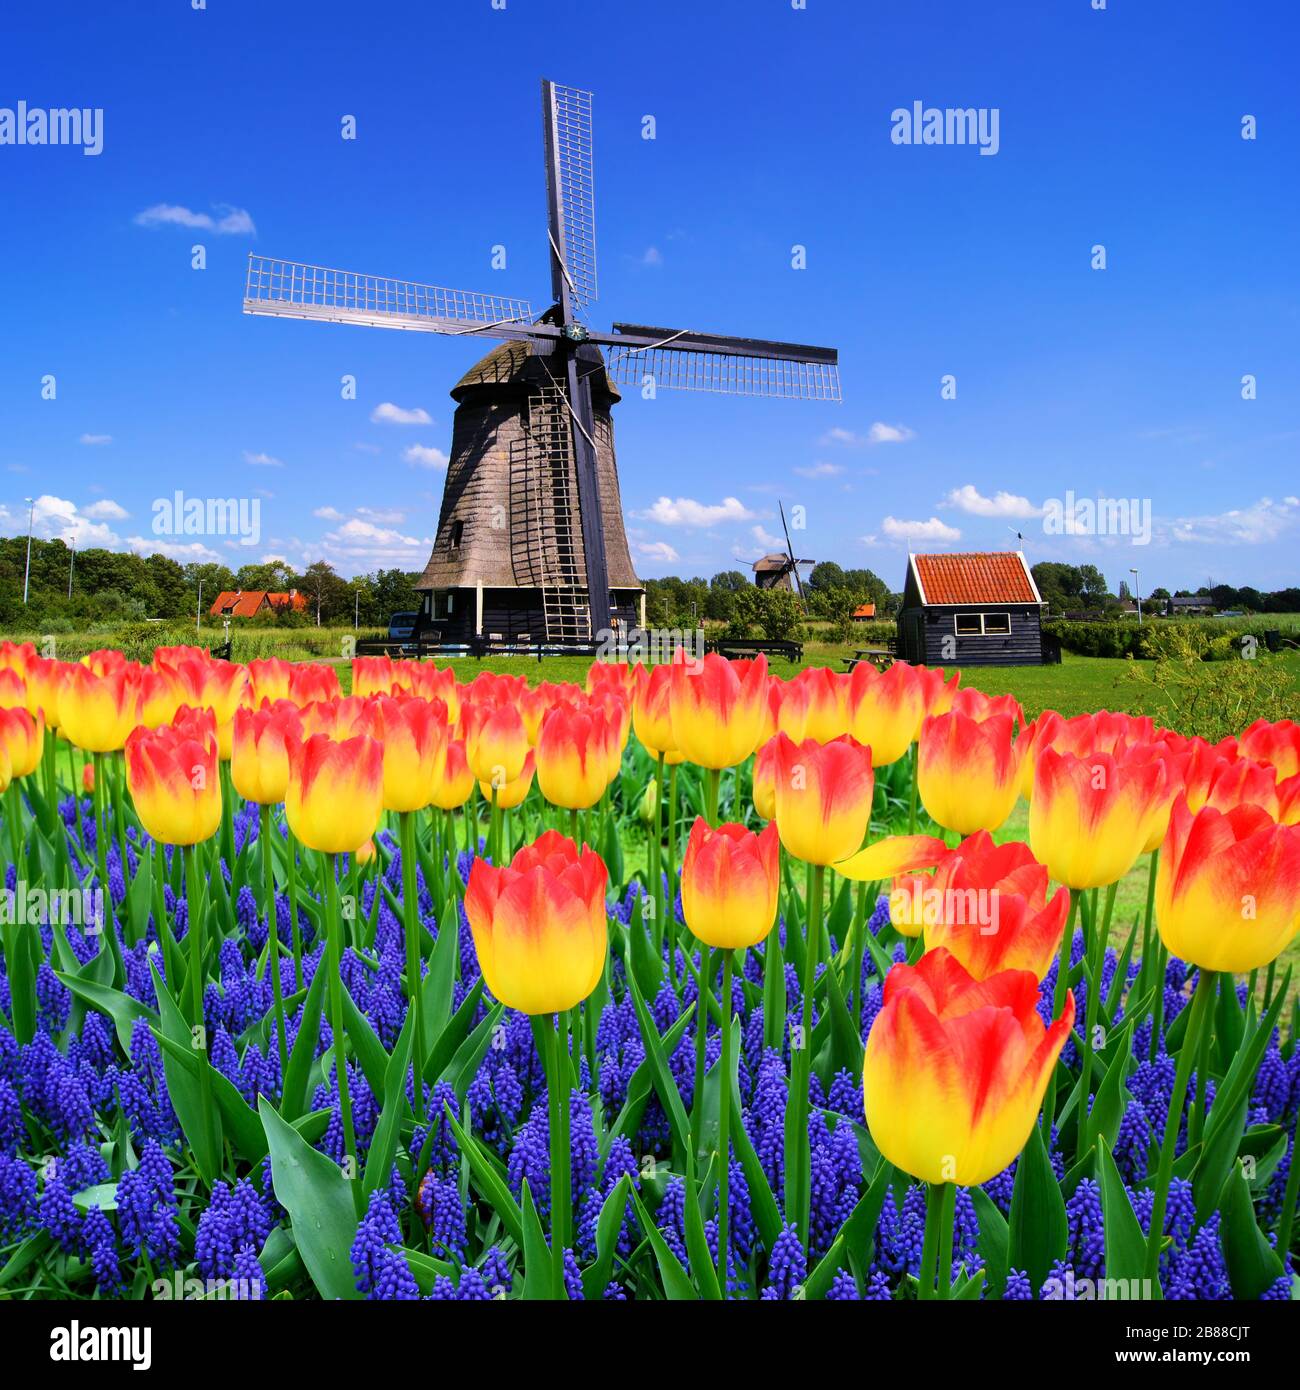 Colorful spring flowers with classic Dutch windmill, Netherlands Stock Photo